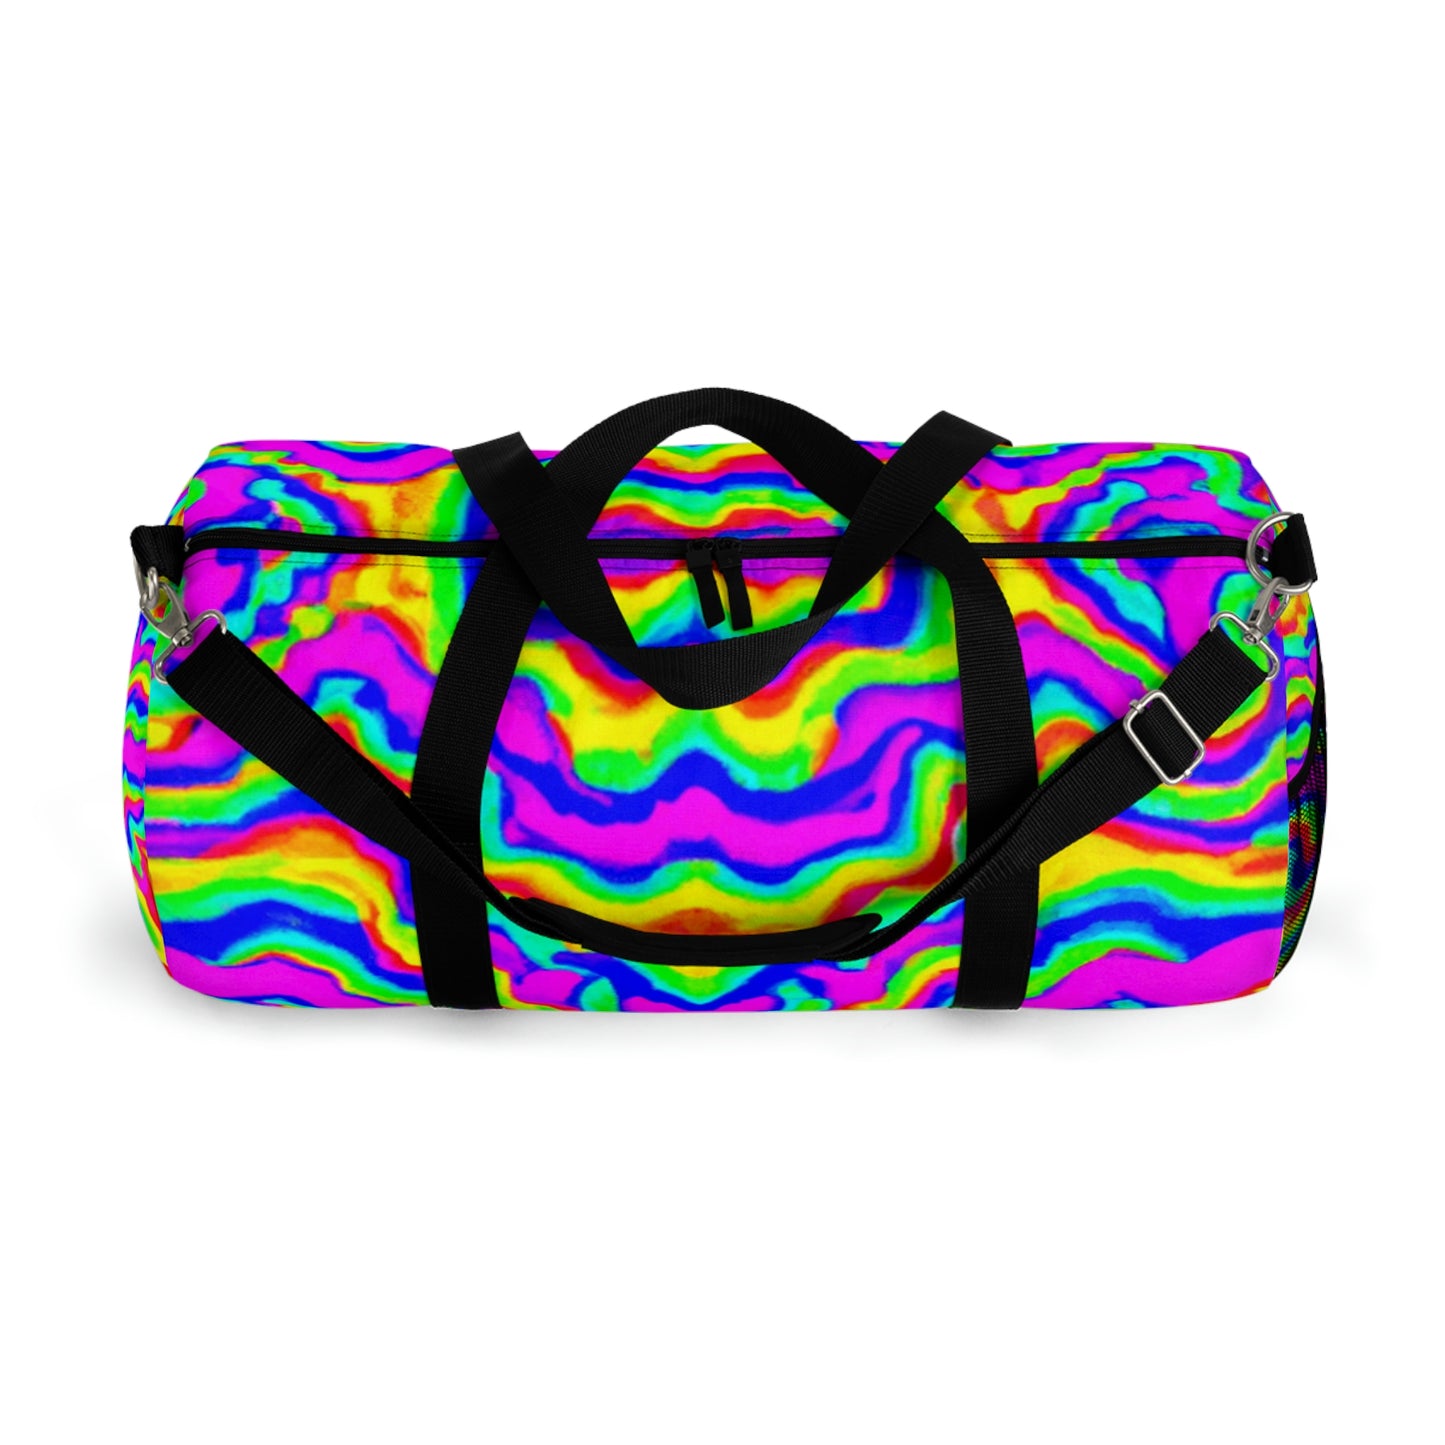 Lorraine's Leathers - Psychedelic Duffel Bag